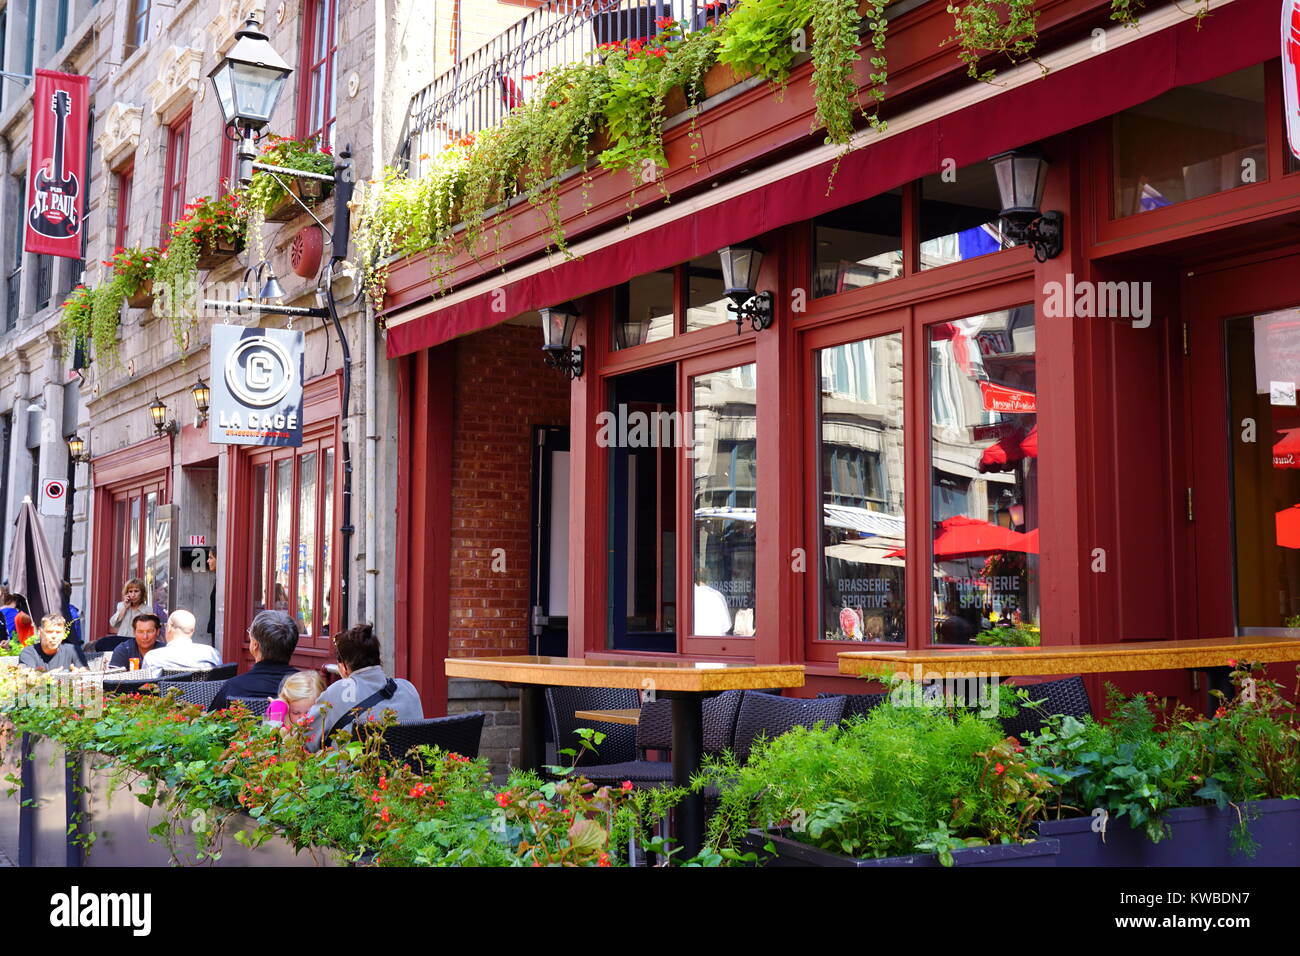 La Cage - Brasserie sportive restaurant in Old Montreal, Quebec, Canada  Stock Photo - Alamy